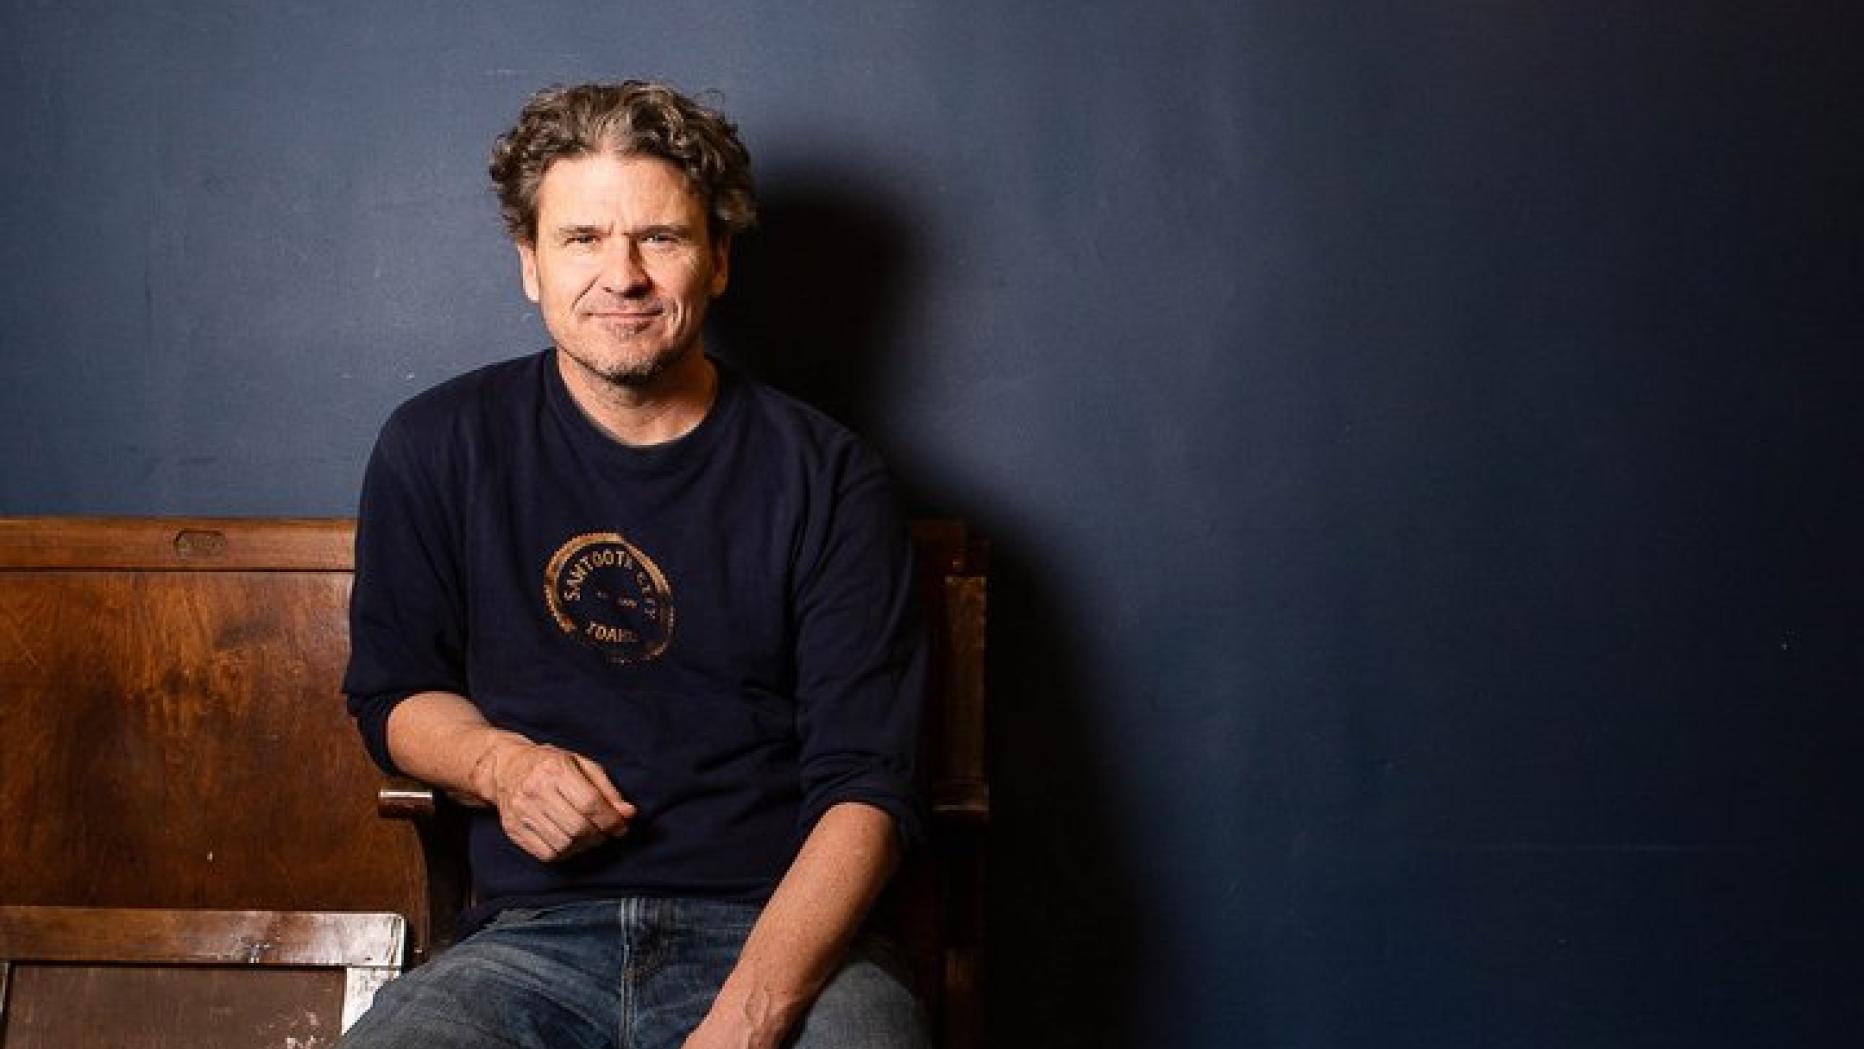 dave eggers the every